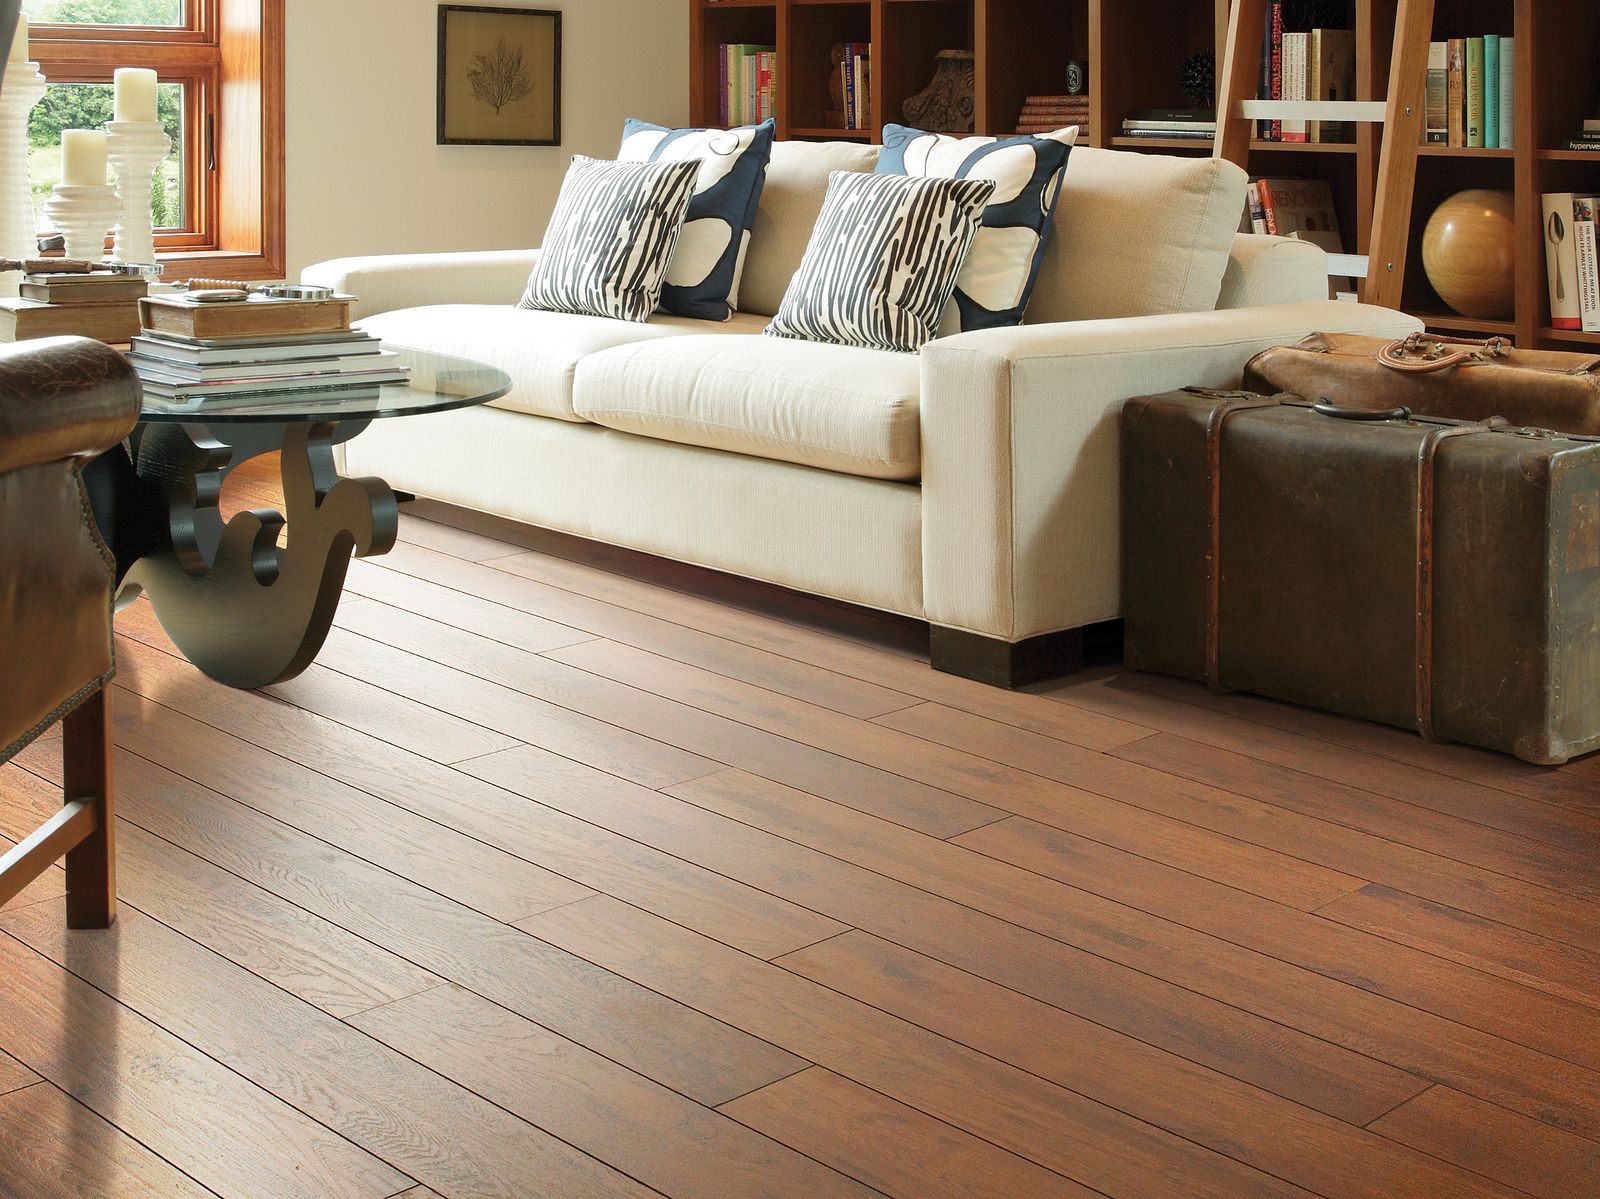 Installing Laminate Flooring A How To, How To Install Laminate Flooring In Living Room